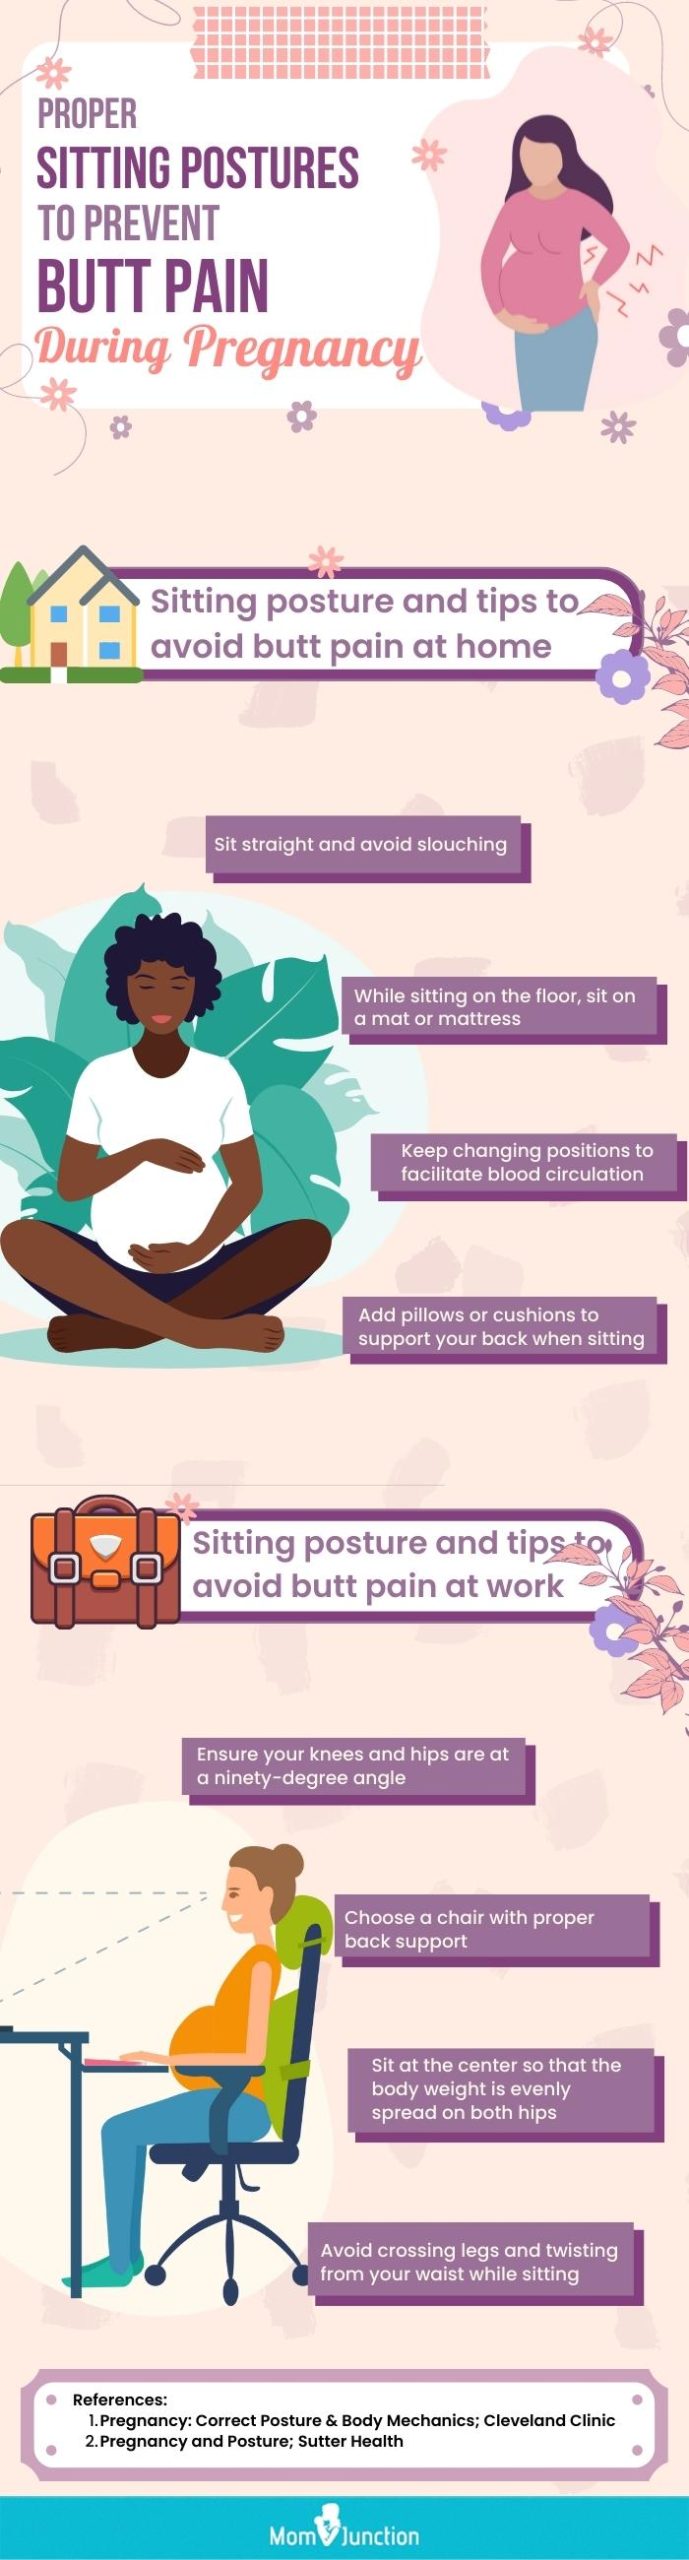 proper sitting postures to prevent butt pain during pregnancy (infographic)